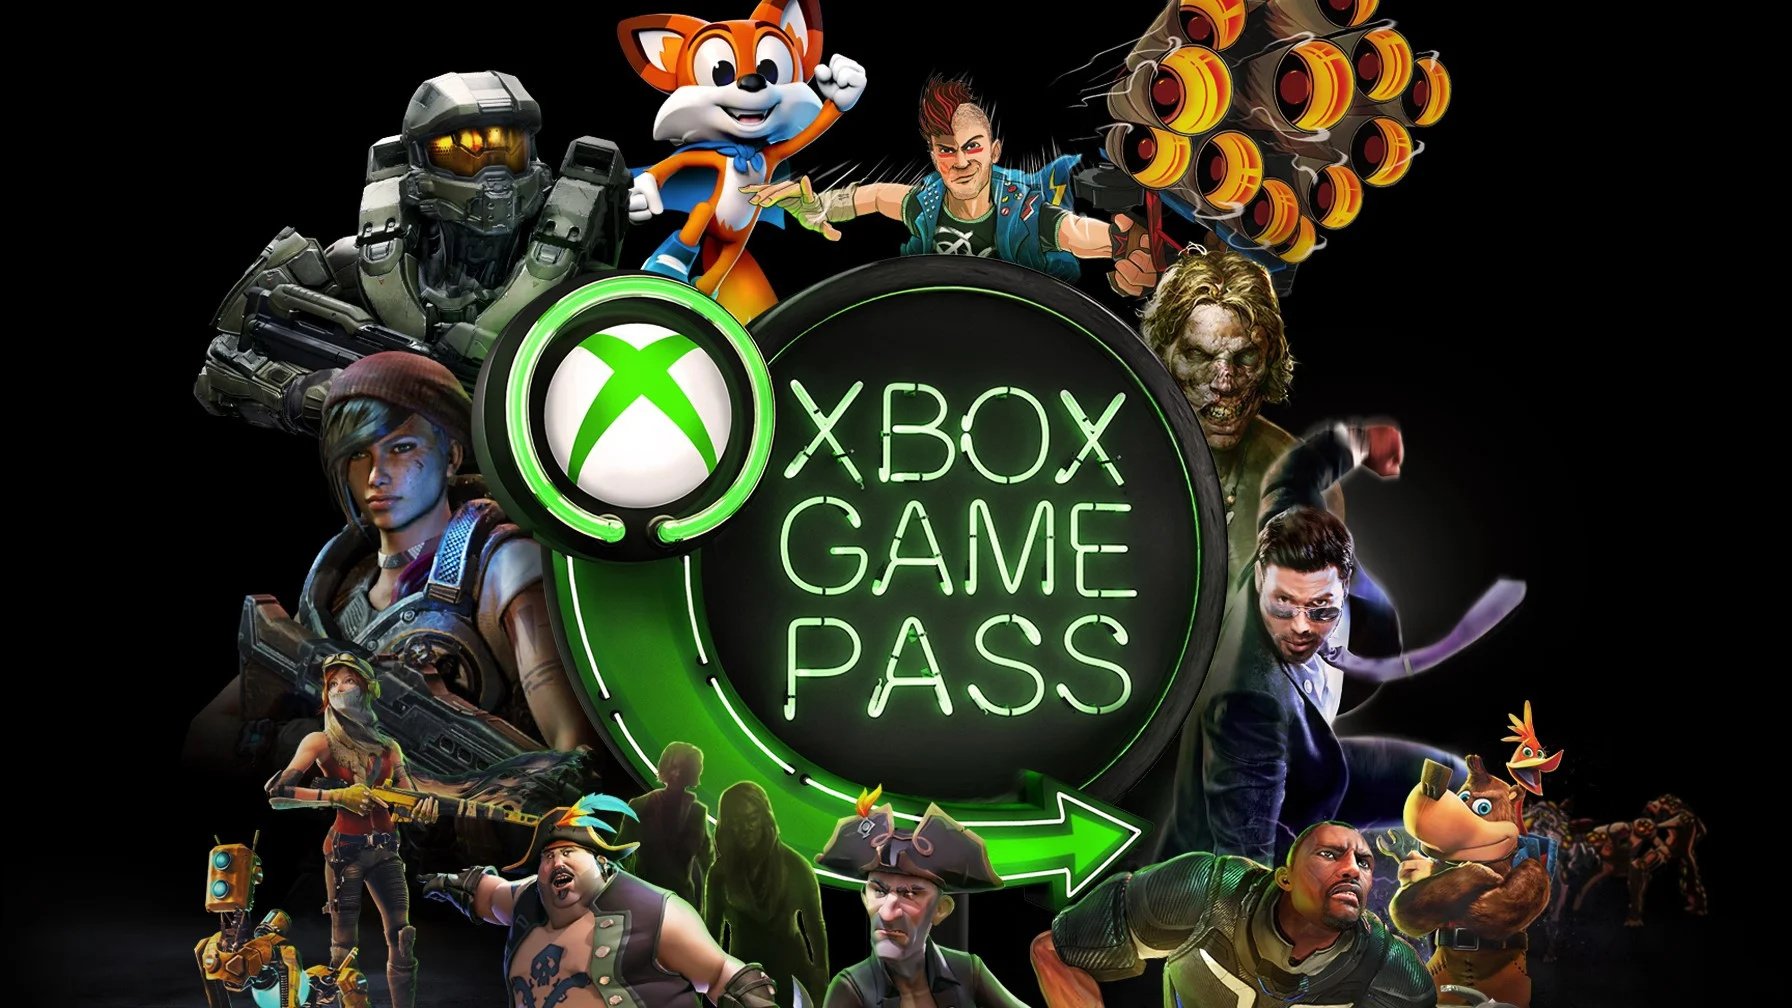 coming to xbox game pass